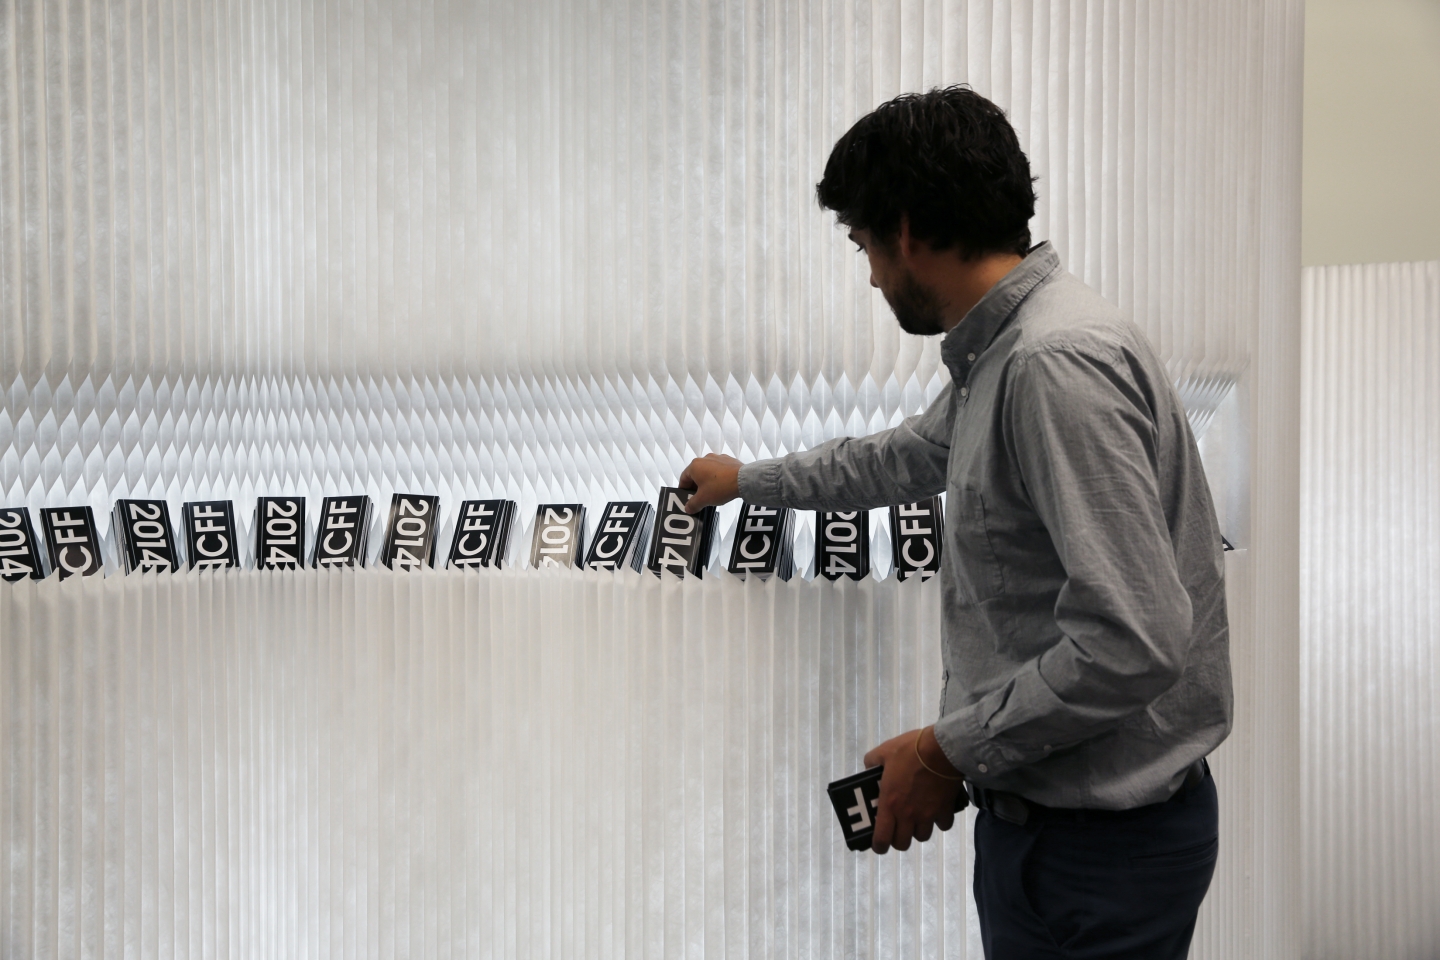 portable wall partition in white by molo - a man retrieves a postcard from a display cut into a softwall